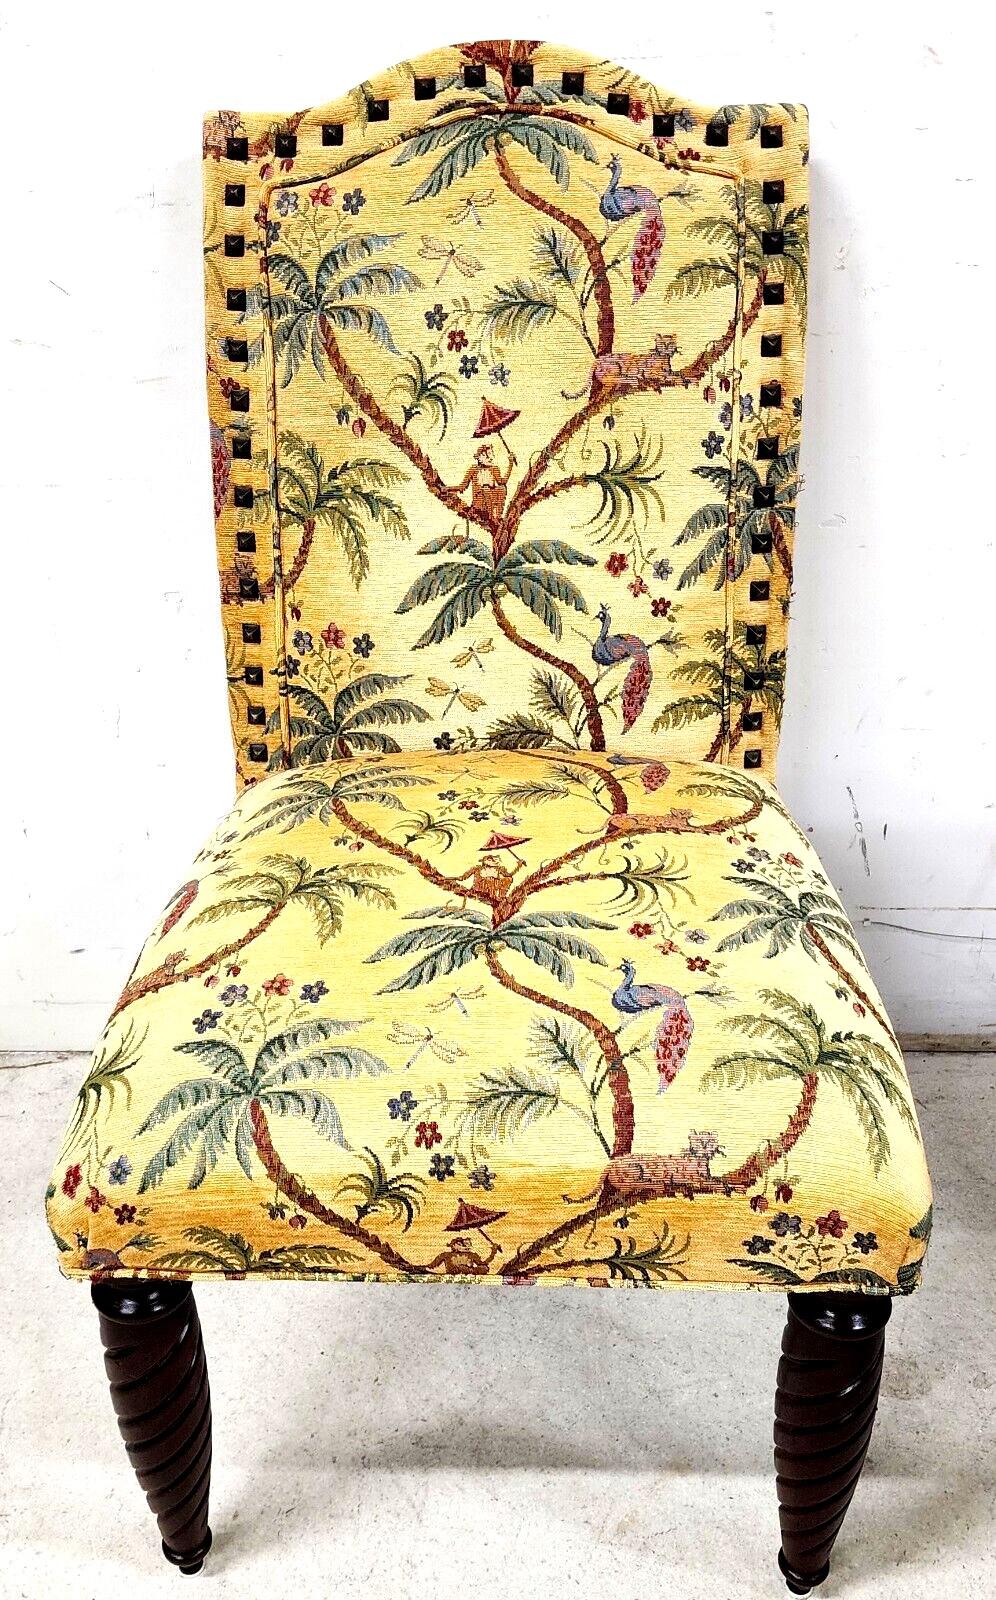 For FULL item description click on CONTINUE READING at the bottom of this page.

Offering One Of Our Recent Palm Beach Estate Fine Furniture Acquisitions Of A 
Set of 8 Tropical Jungle Style Dining Chairs with Monkeys, Leopards, Peacocks,